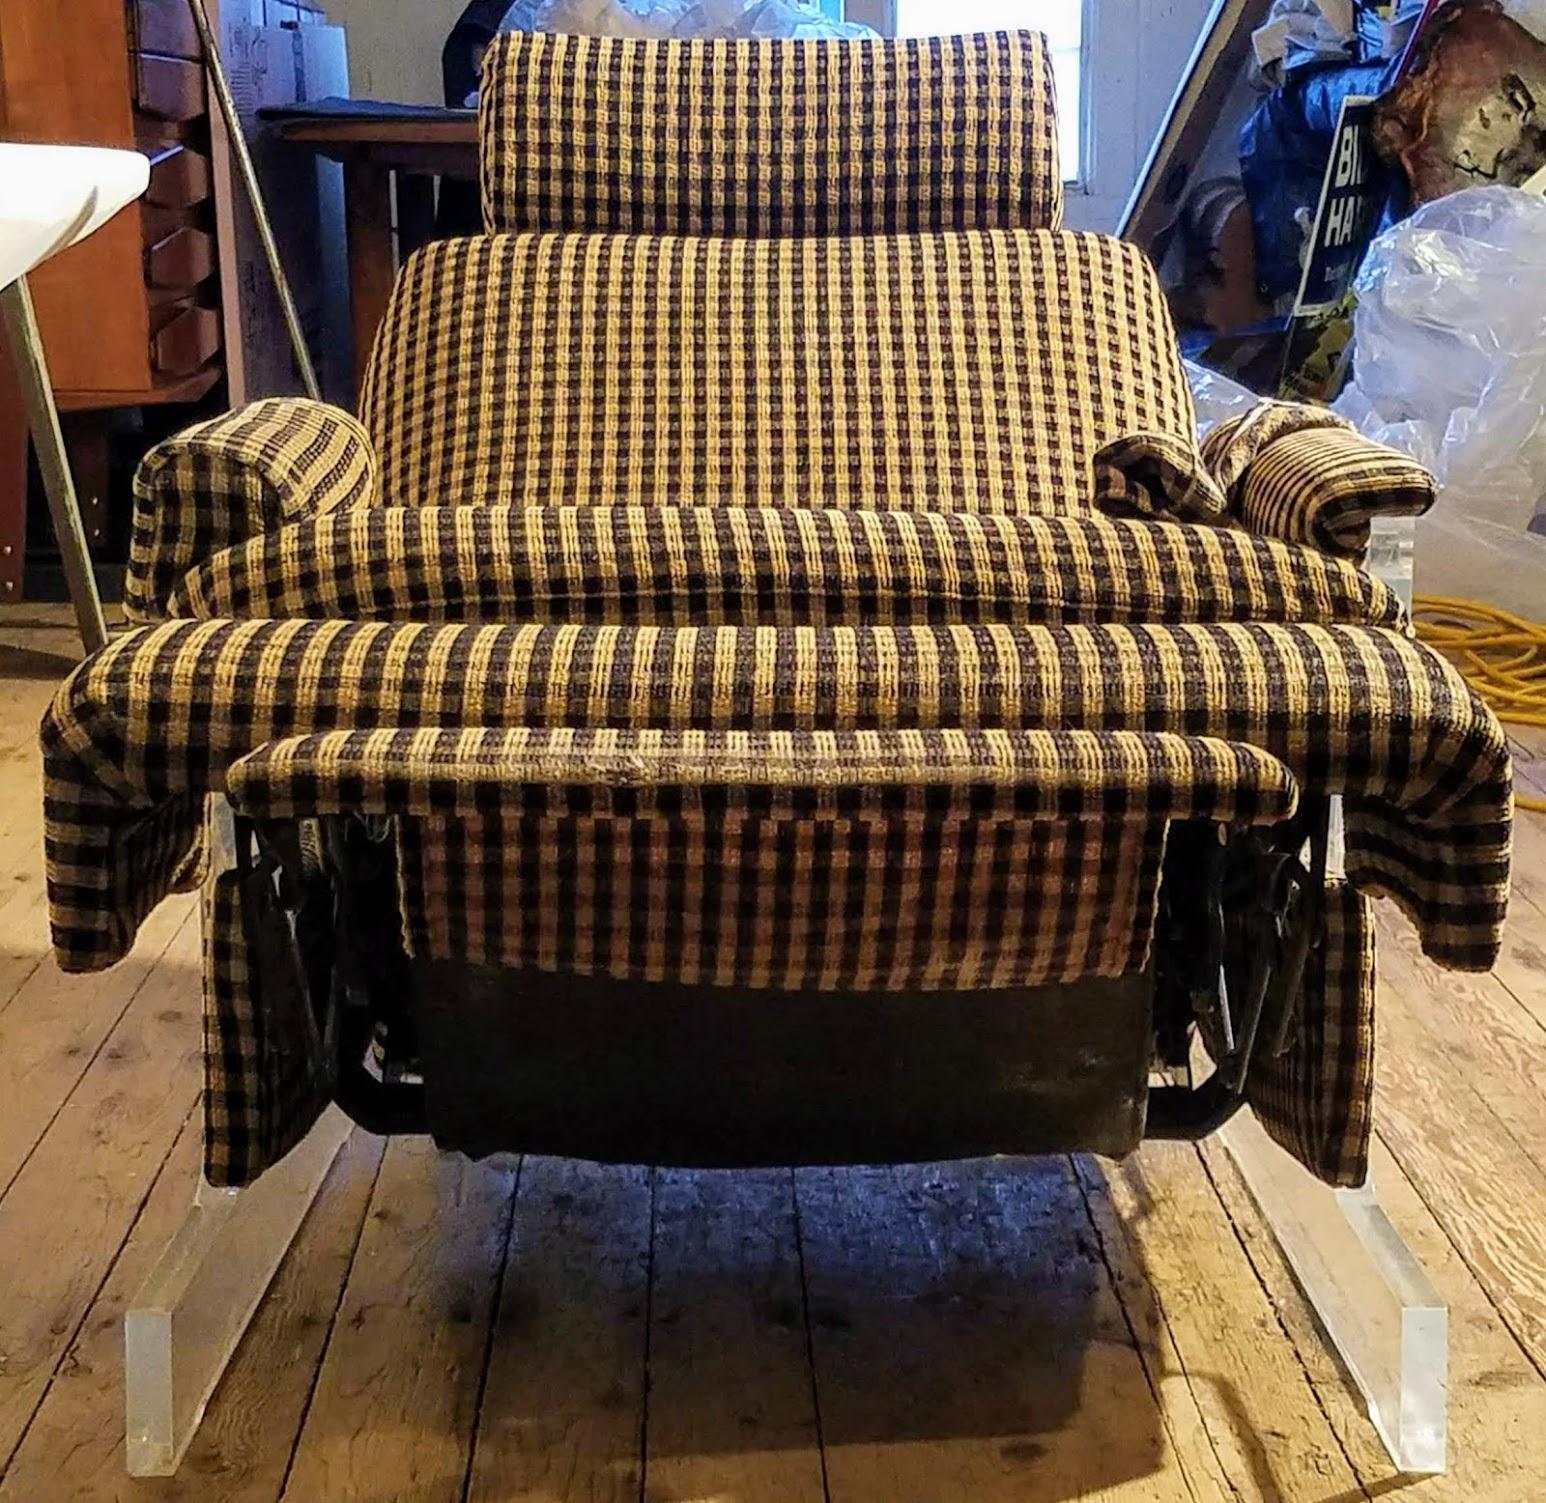 Classic recliner / lounge chair.
Well built, adjustable positioning, the head rest pops up once the chair is fully reclined.
Really comfortable.
The chair extends from 35 to 58 inches.